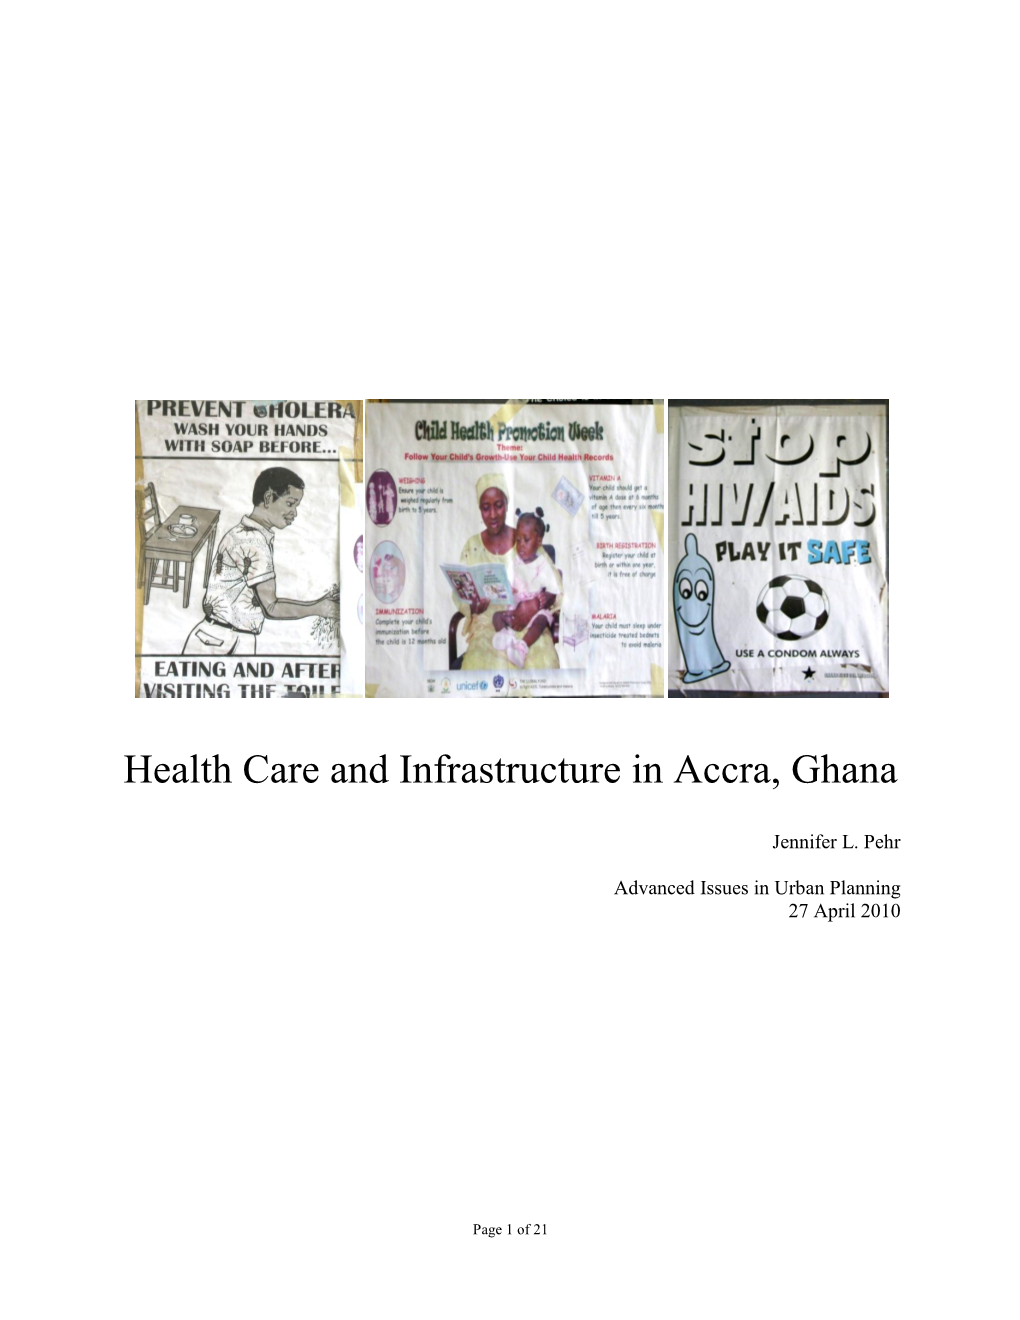 Health Care and Infrastructure in Accra, Ghana